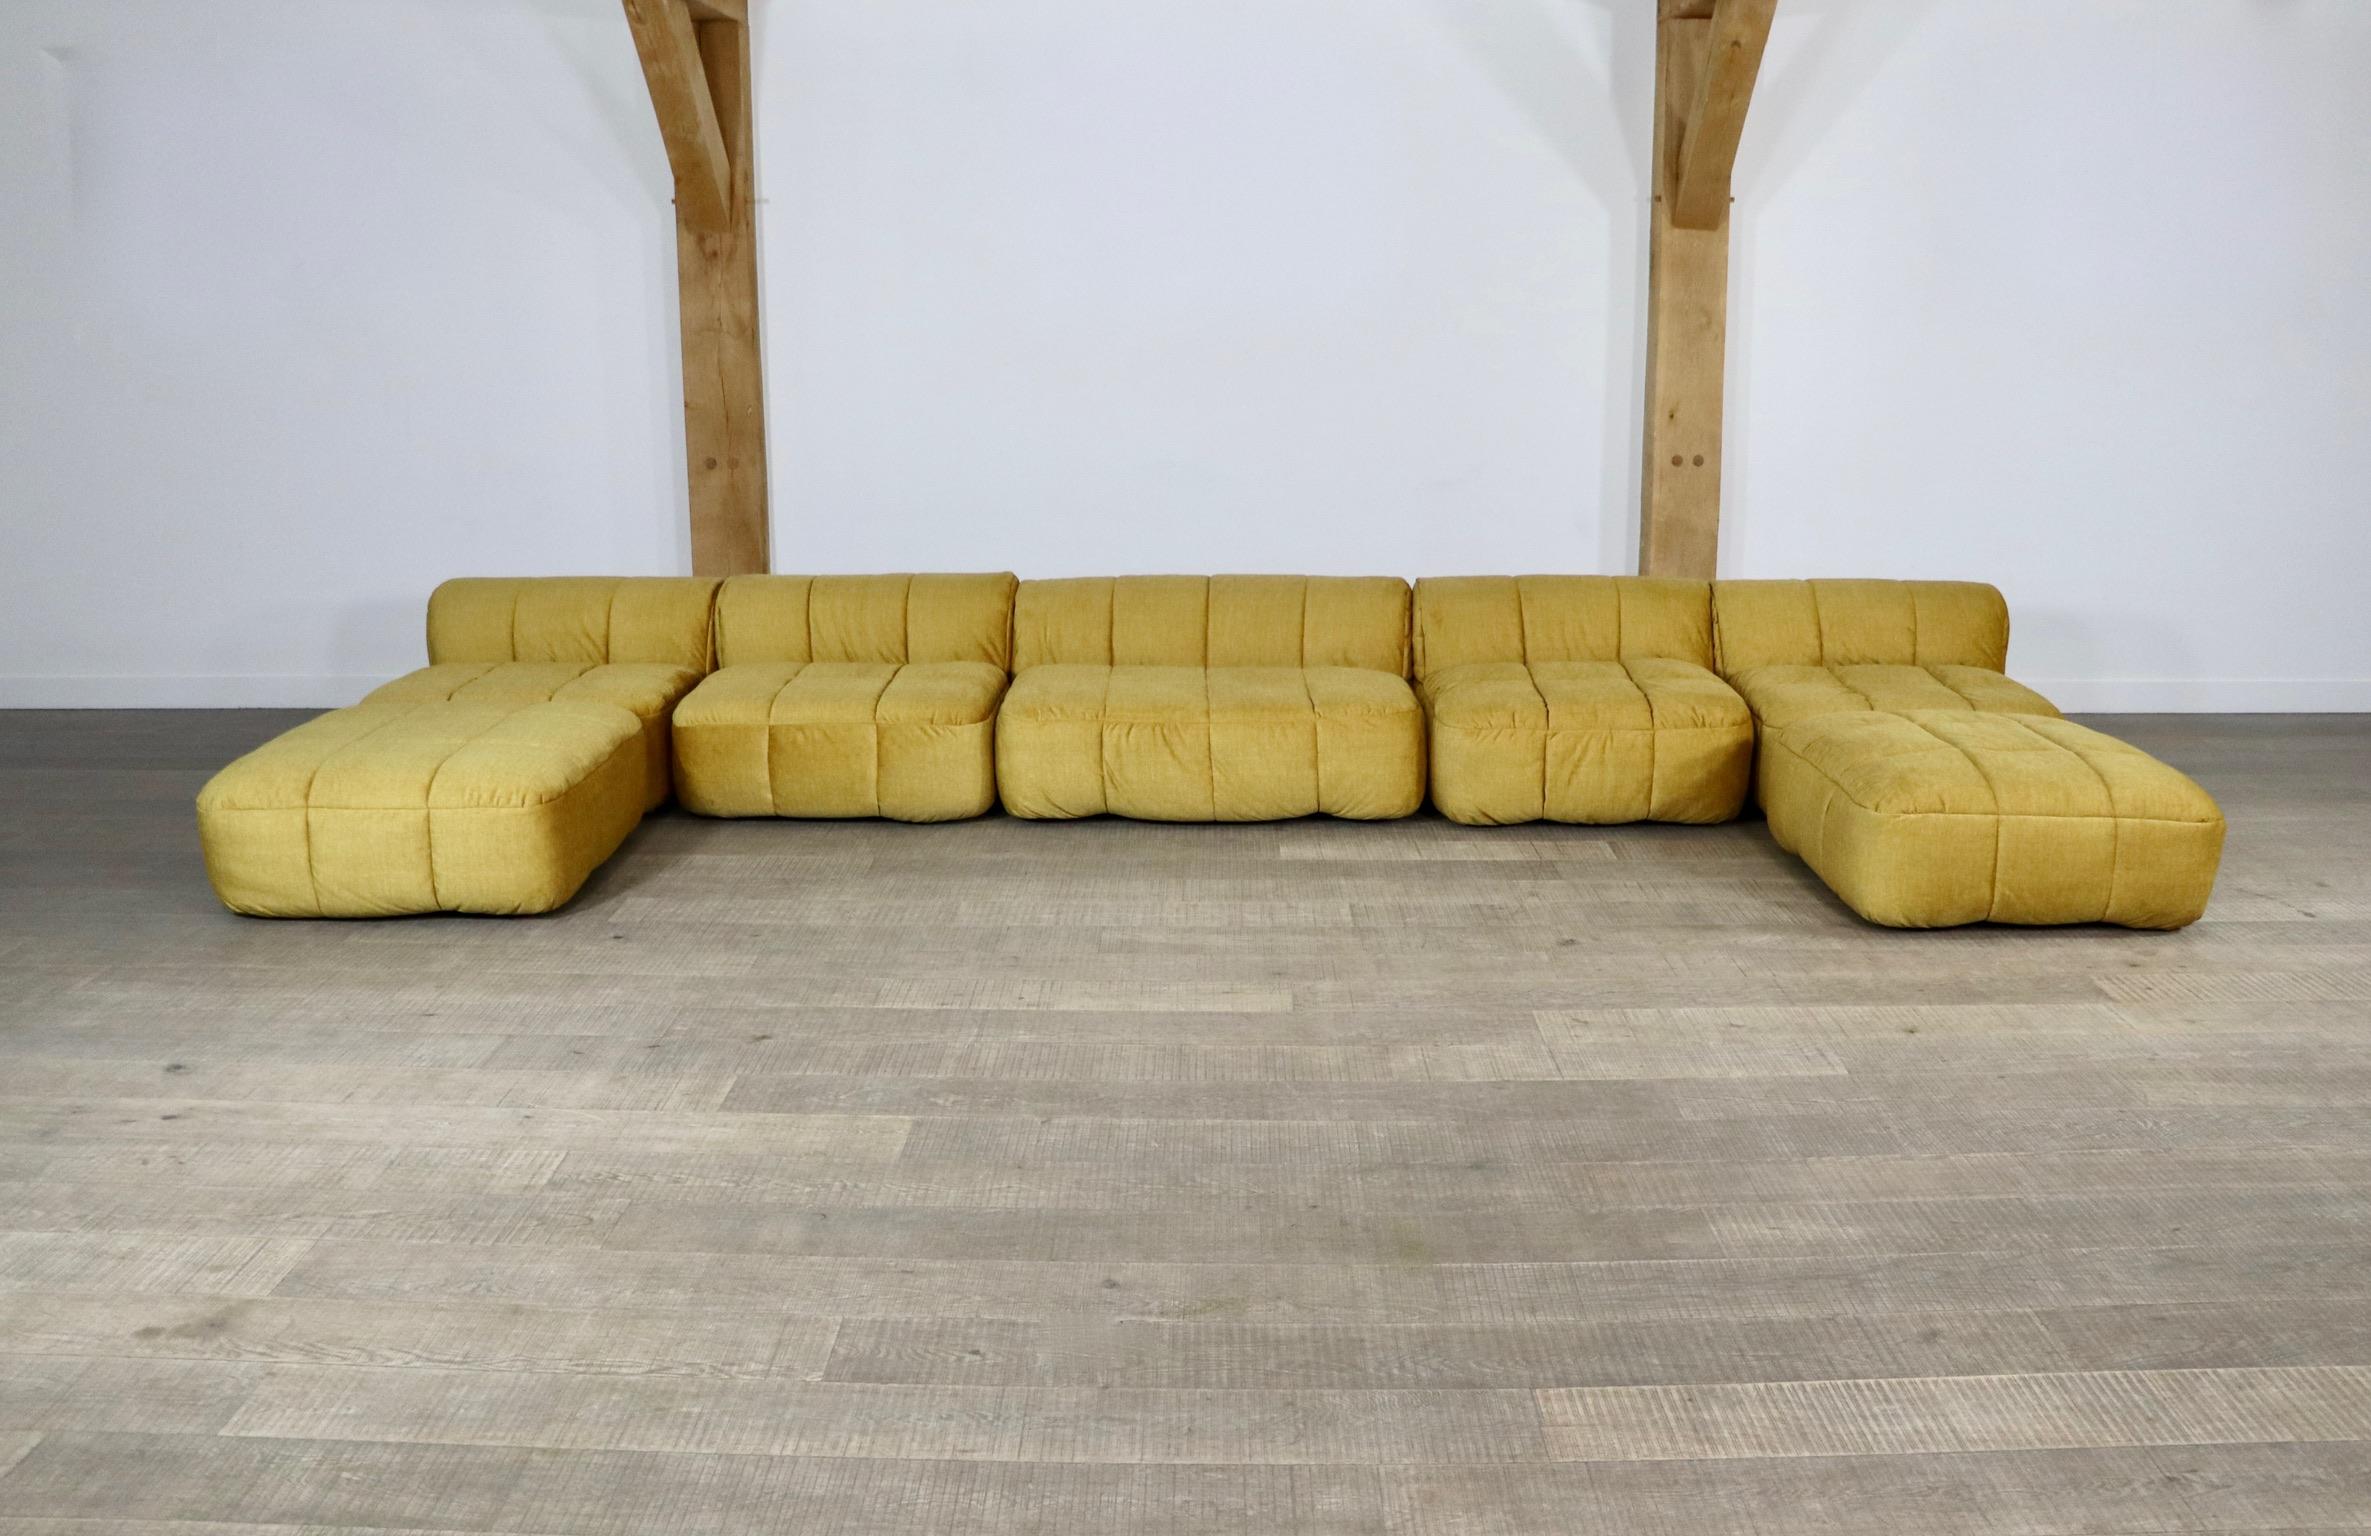 Beautiful modular sofa model Strips designed by Cini Boeri for Arflex, Italy 1972. This incredibly comfortable sofa is the an early edition reupholstered in high quality golden velvet. The sofa can be arranged in endless different settings to create